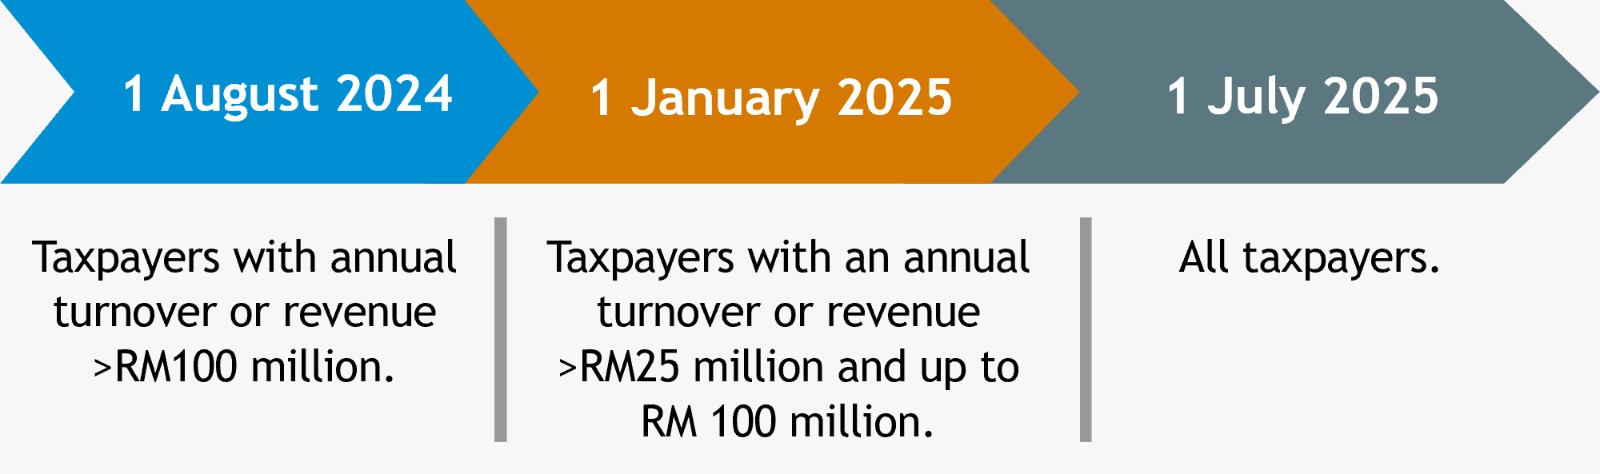 e-Invoicing implementation timeline in Malaysia